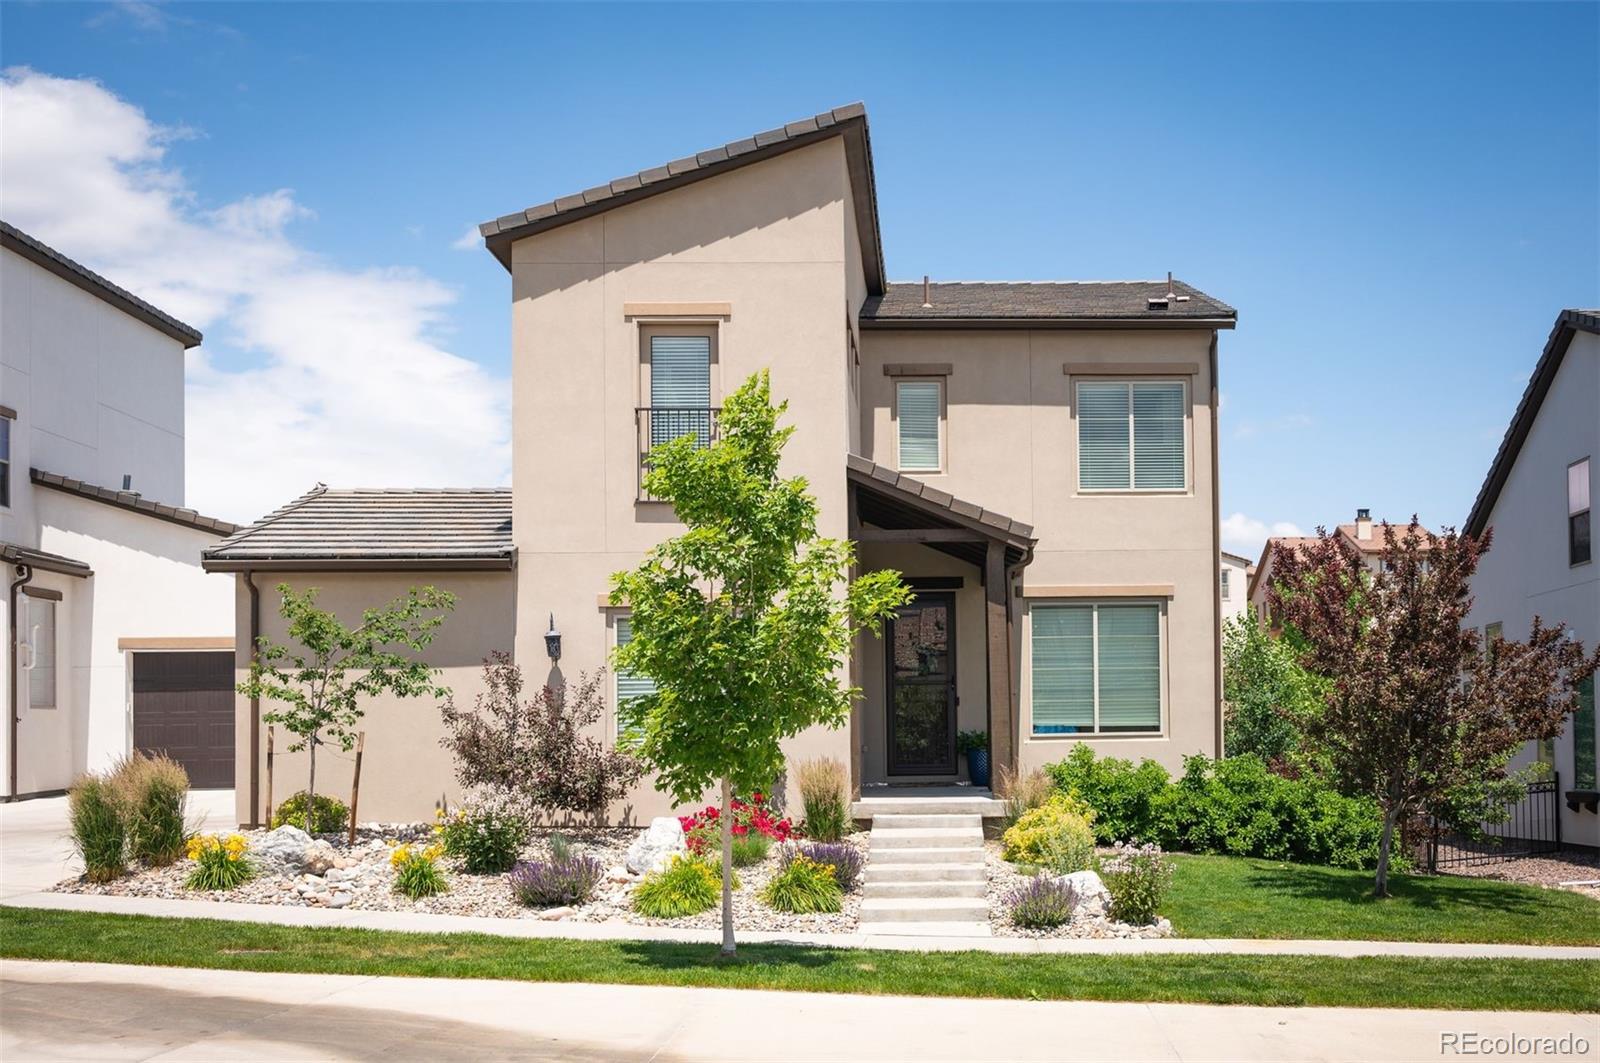 CMA Image for 2622 s norse court,Lakewood, Colorado